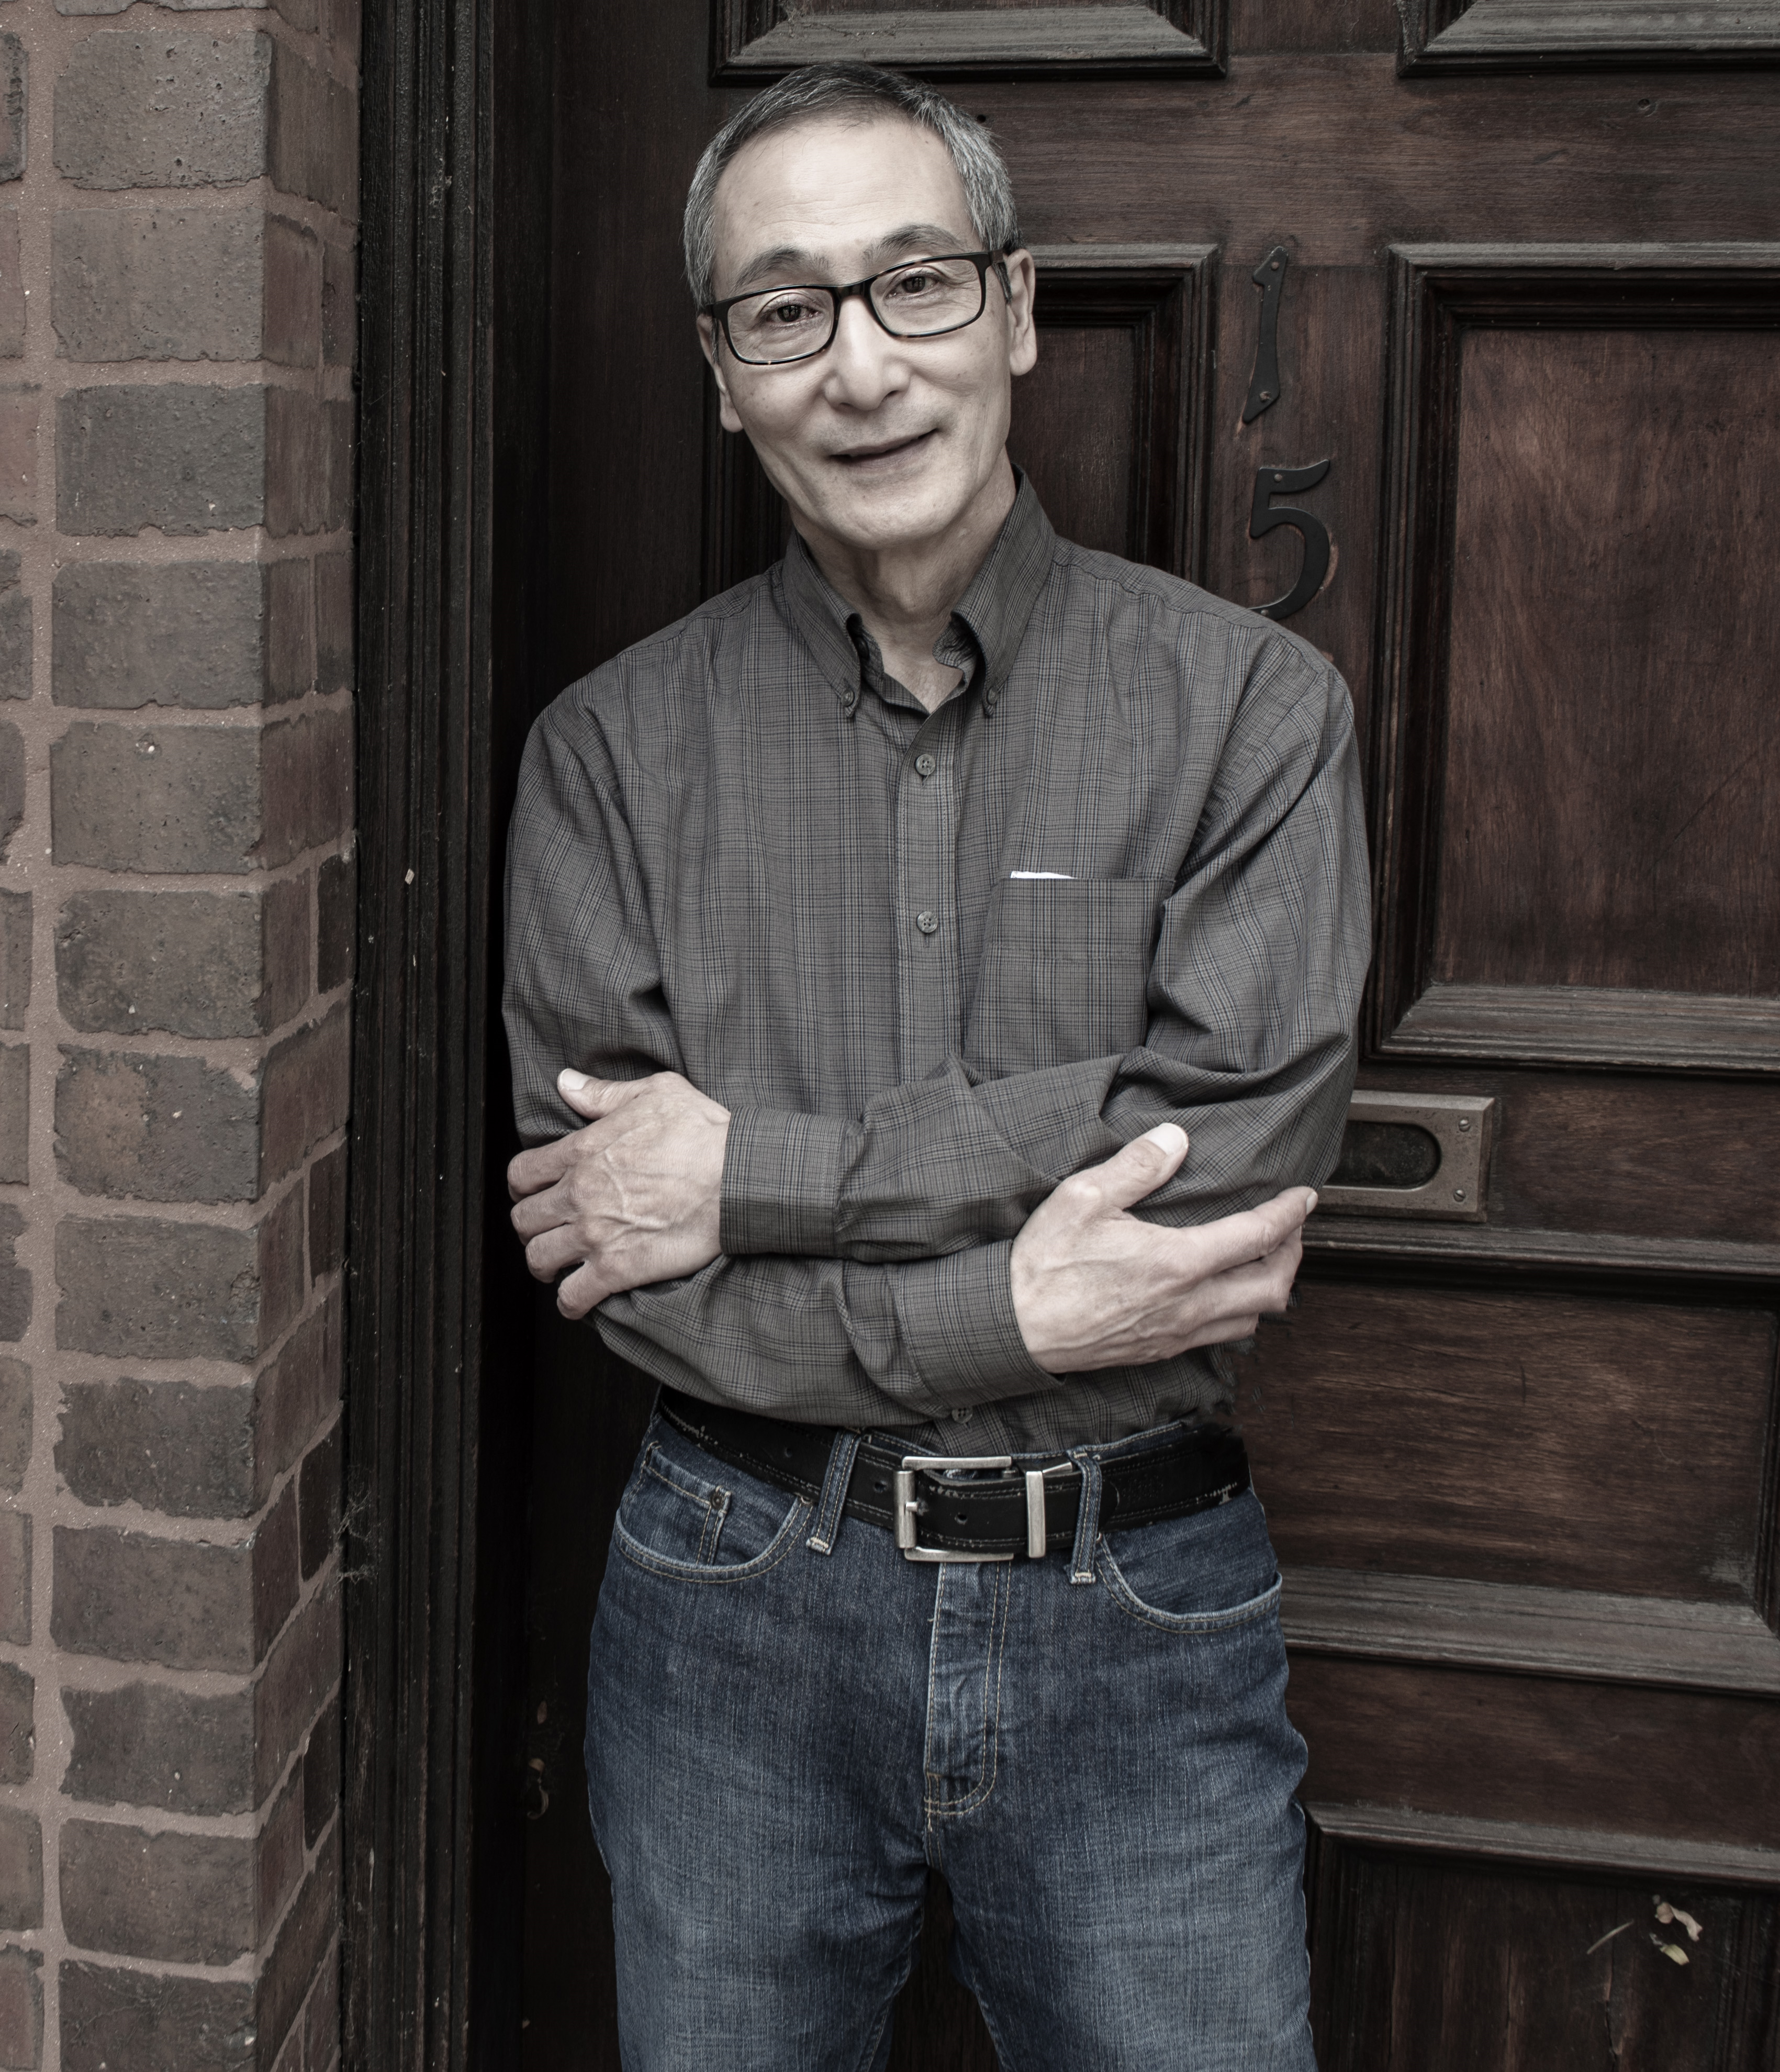 IMAGE: Steve Serikaku stands in front of a wooden door with arms folded and bearing a partial smile. He is wearing a gray button down shirt and blue jeans. Photo by Edvetté Wilson Jones.